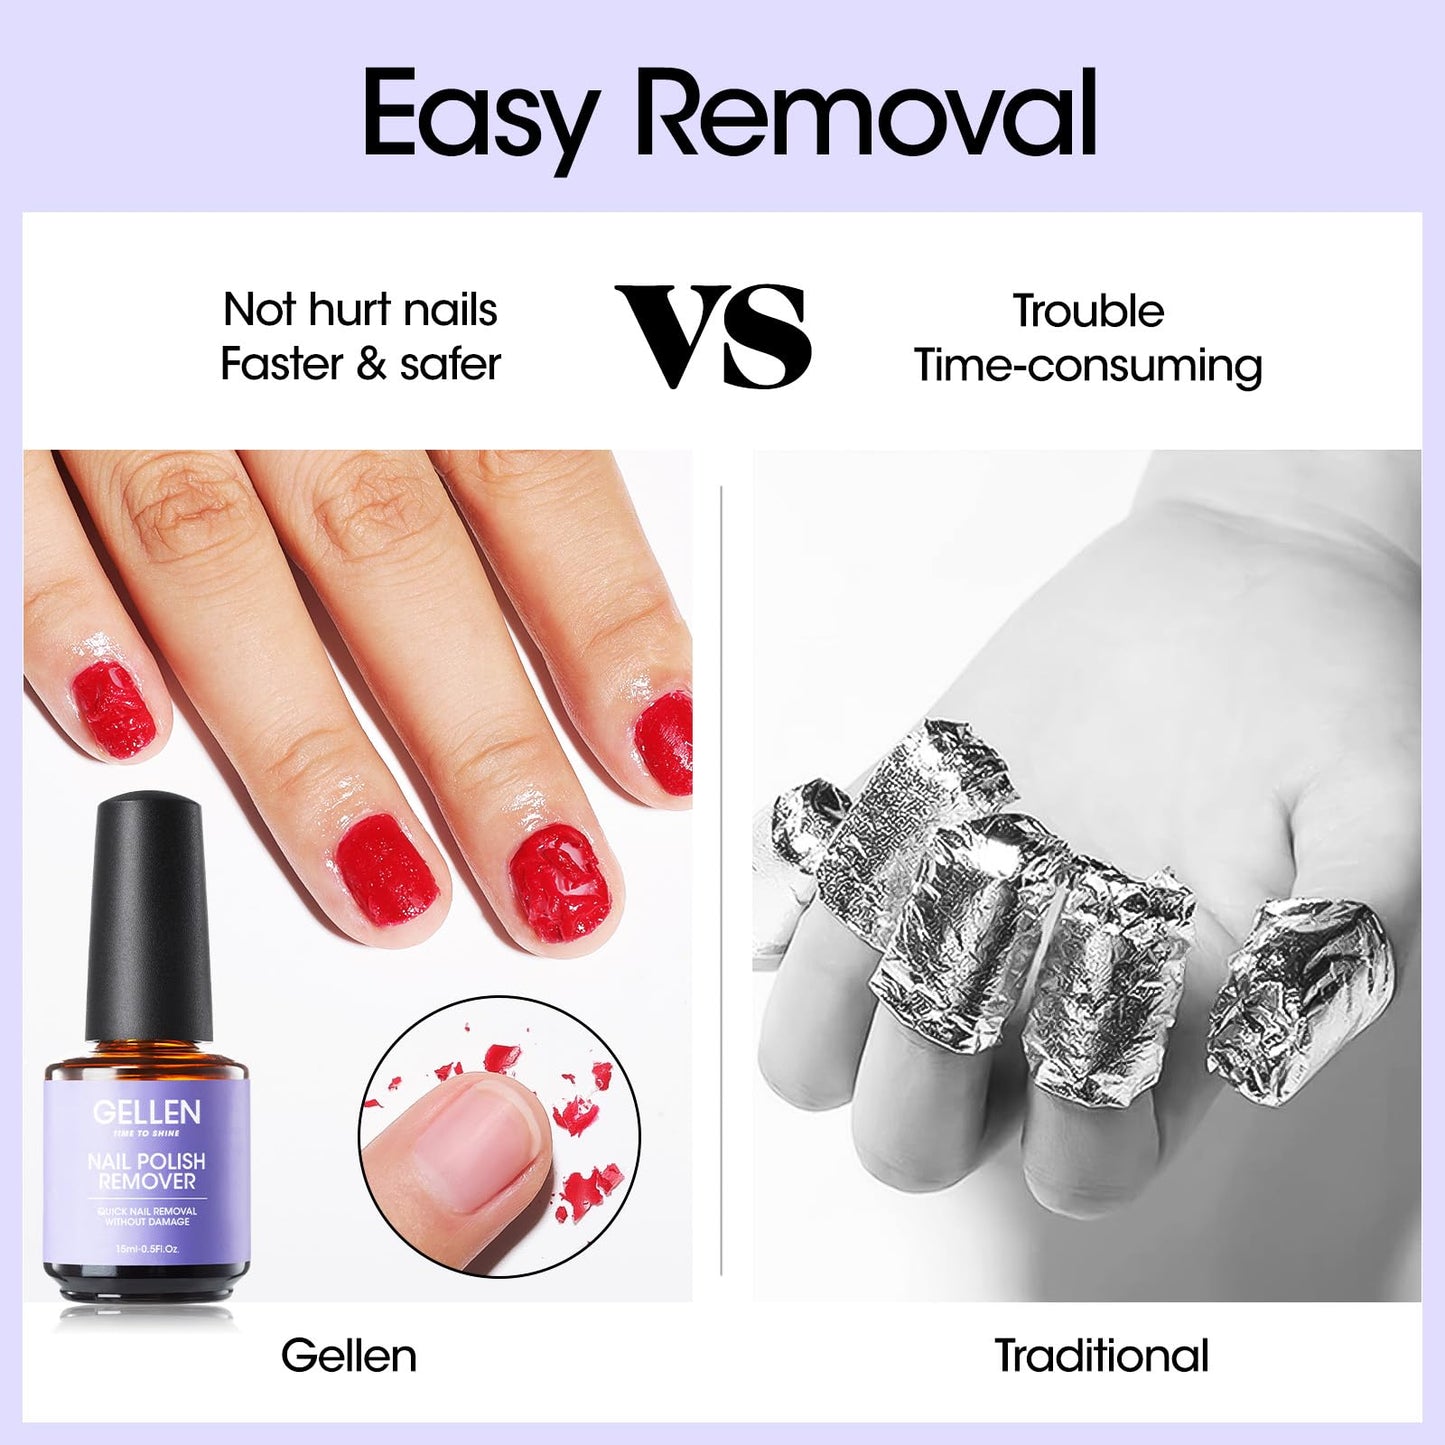 Gellen Gel Nail Polish Remover, 1pc Gel Polish Remover for Nails, Quick & Easy Nail Gel Remover in 2-5 Minutes, No Need Soaking Or Wrapping -15ml